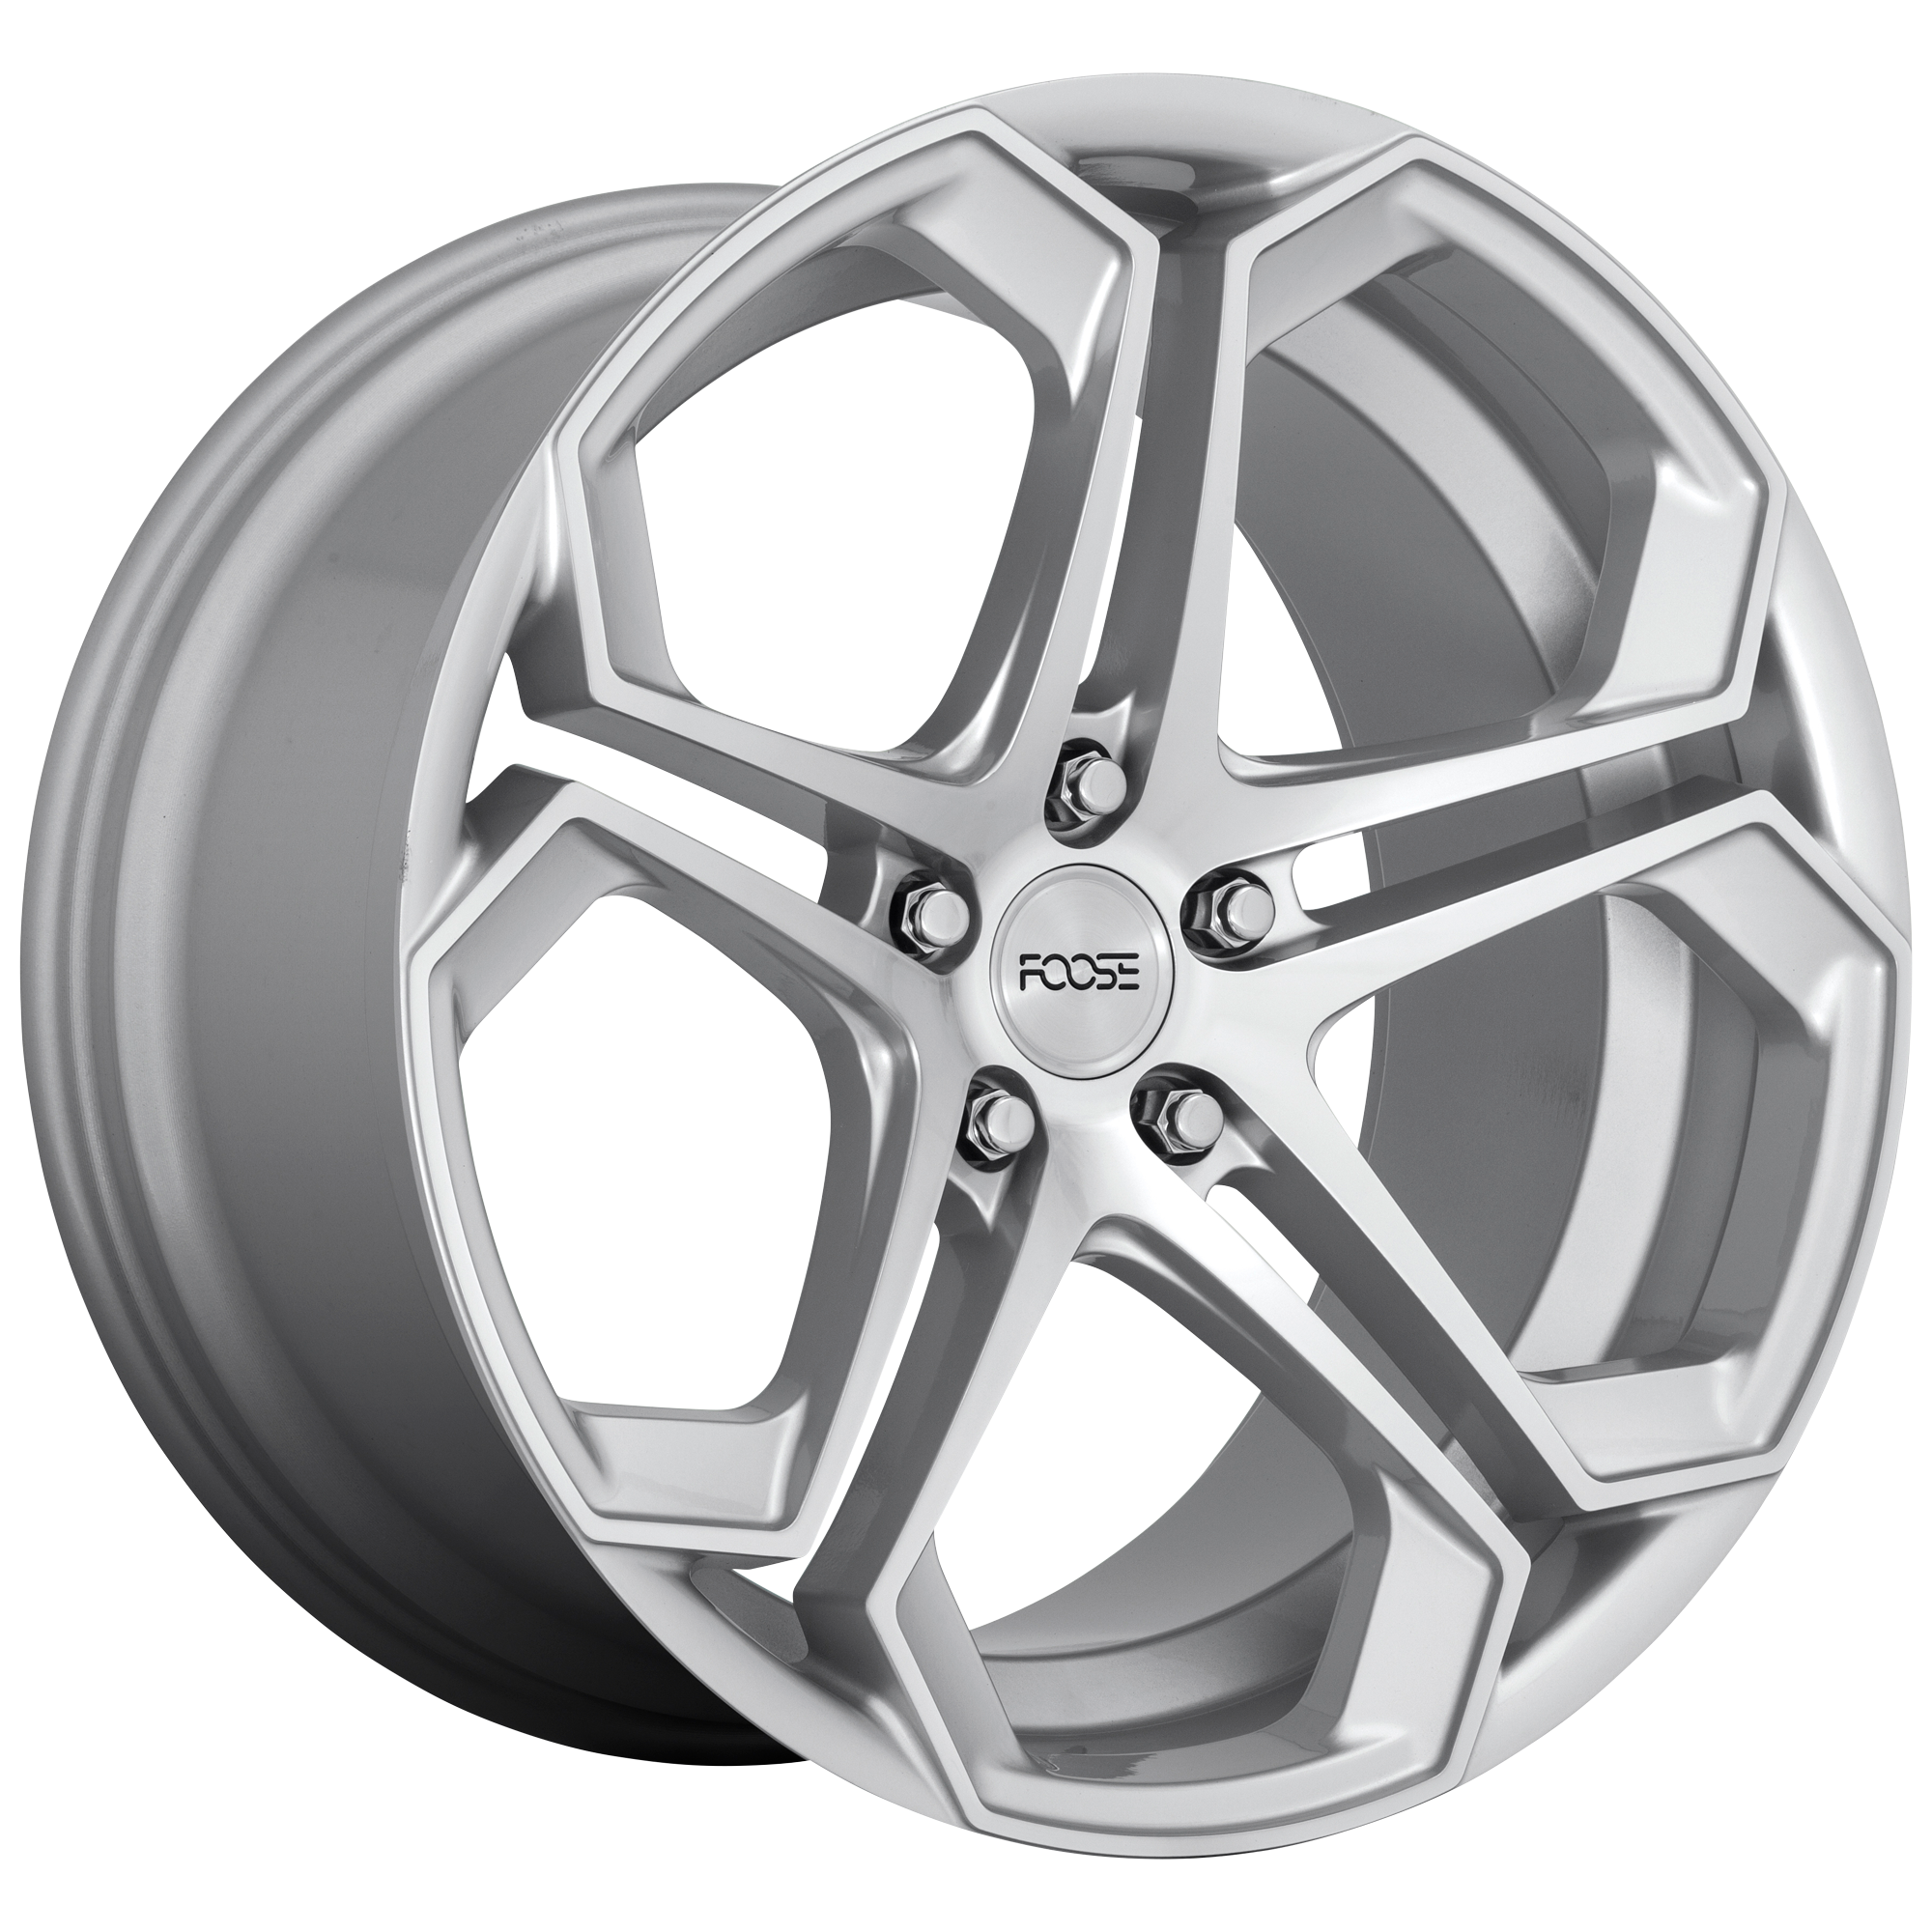 IMPALA 20x10.5 5x114.30 GLOSS SILVER MACHINED (40 mm) - Tires and Engine Performance